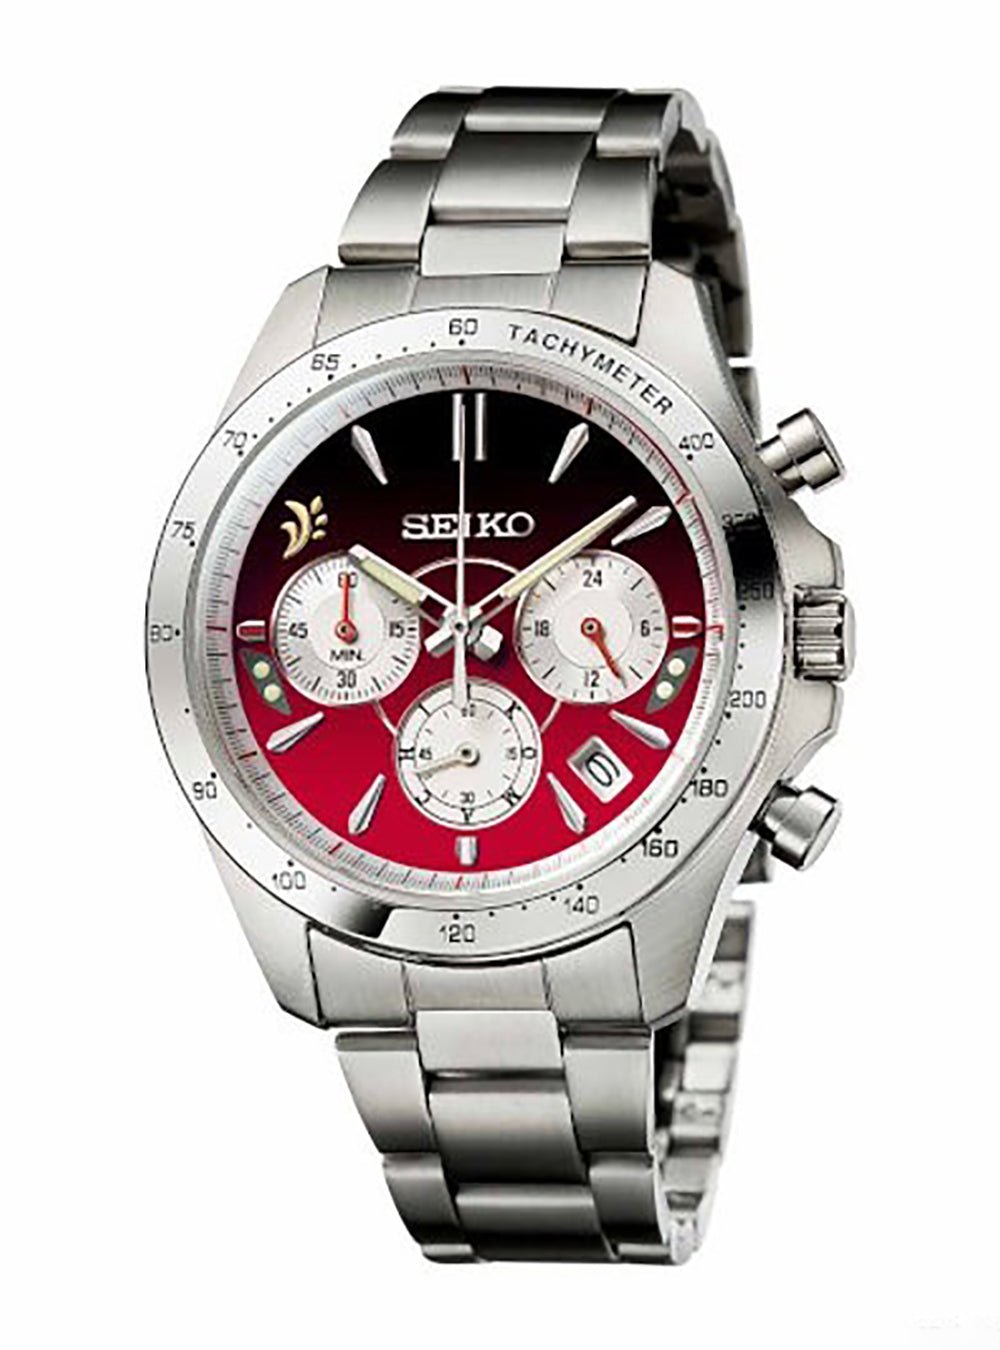 SEIKO × JR EAST 10TH ANNIVERSARY OF KOMACHI MADE IN JAPAN LIMITED EDITIONWRISTWATCHjapan-select